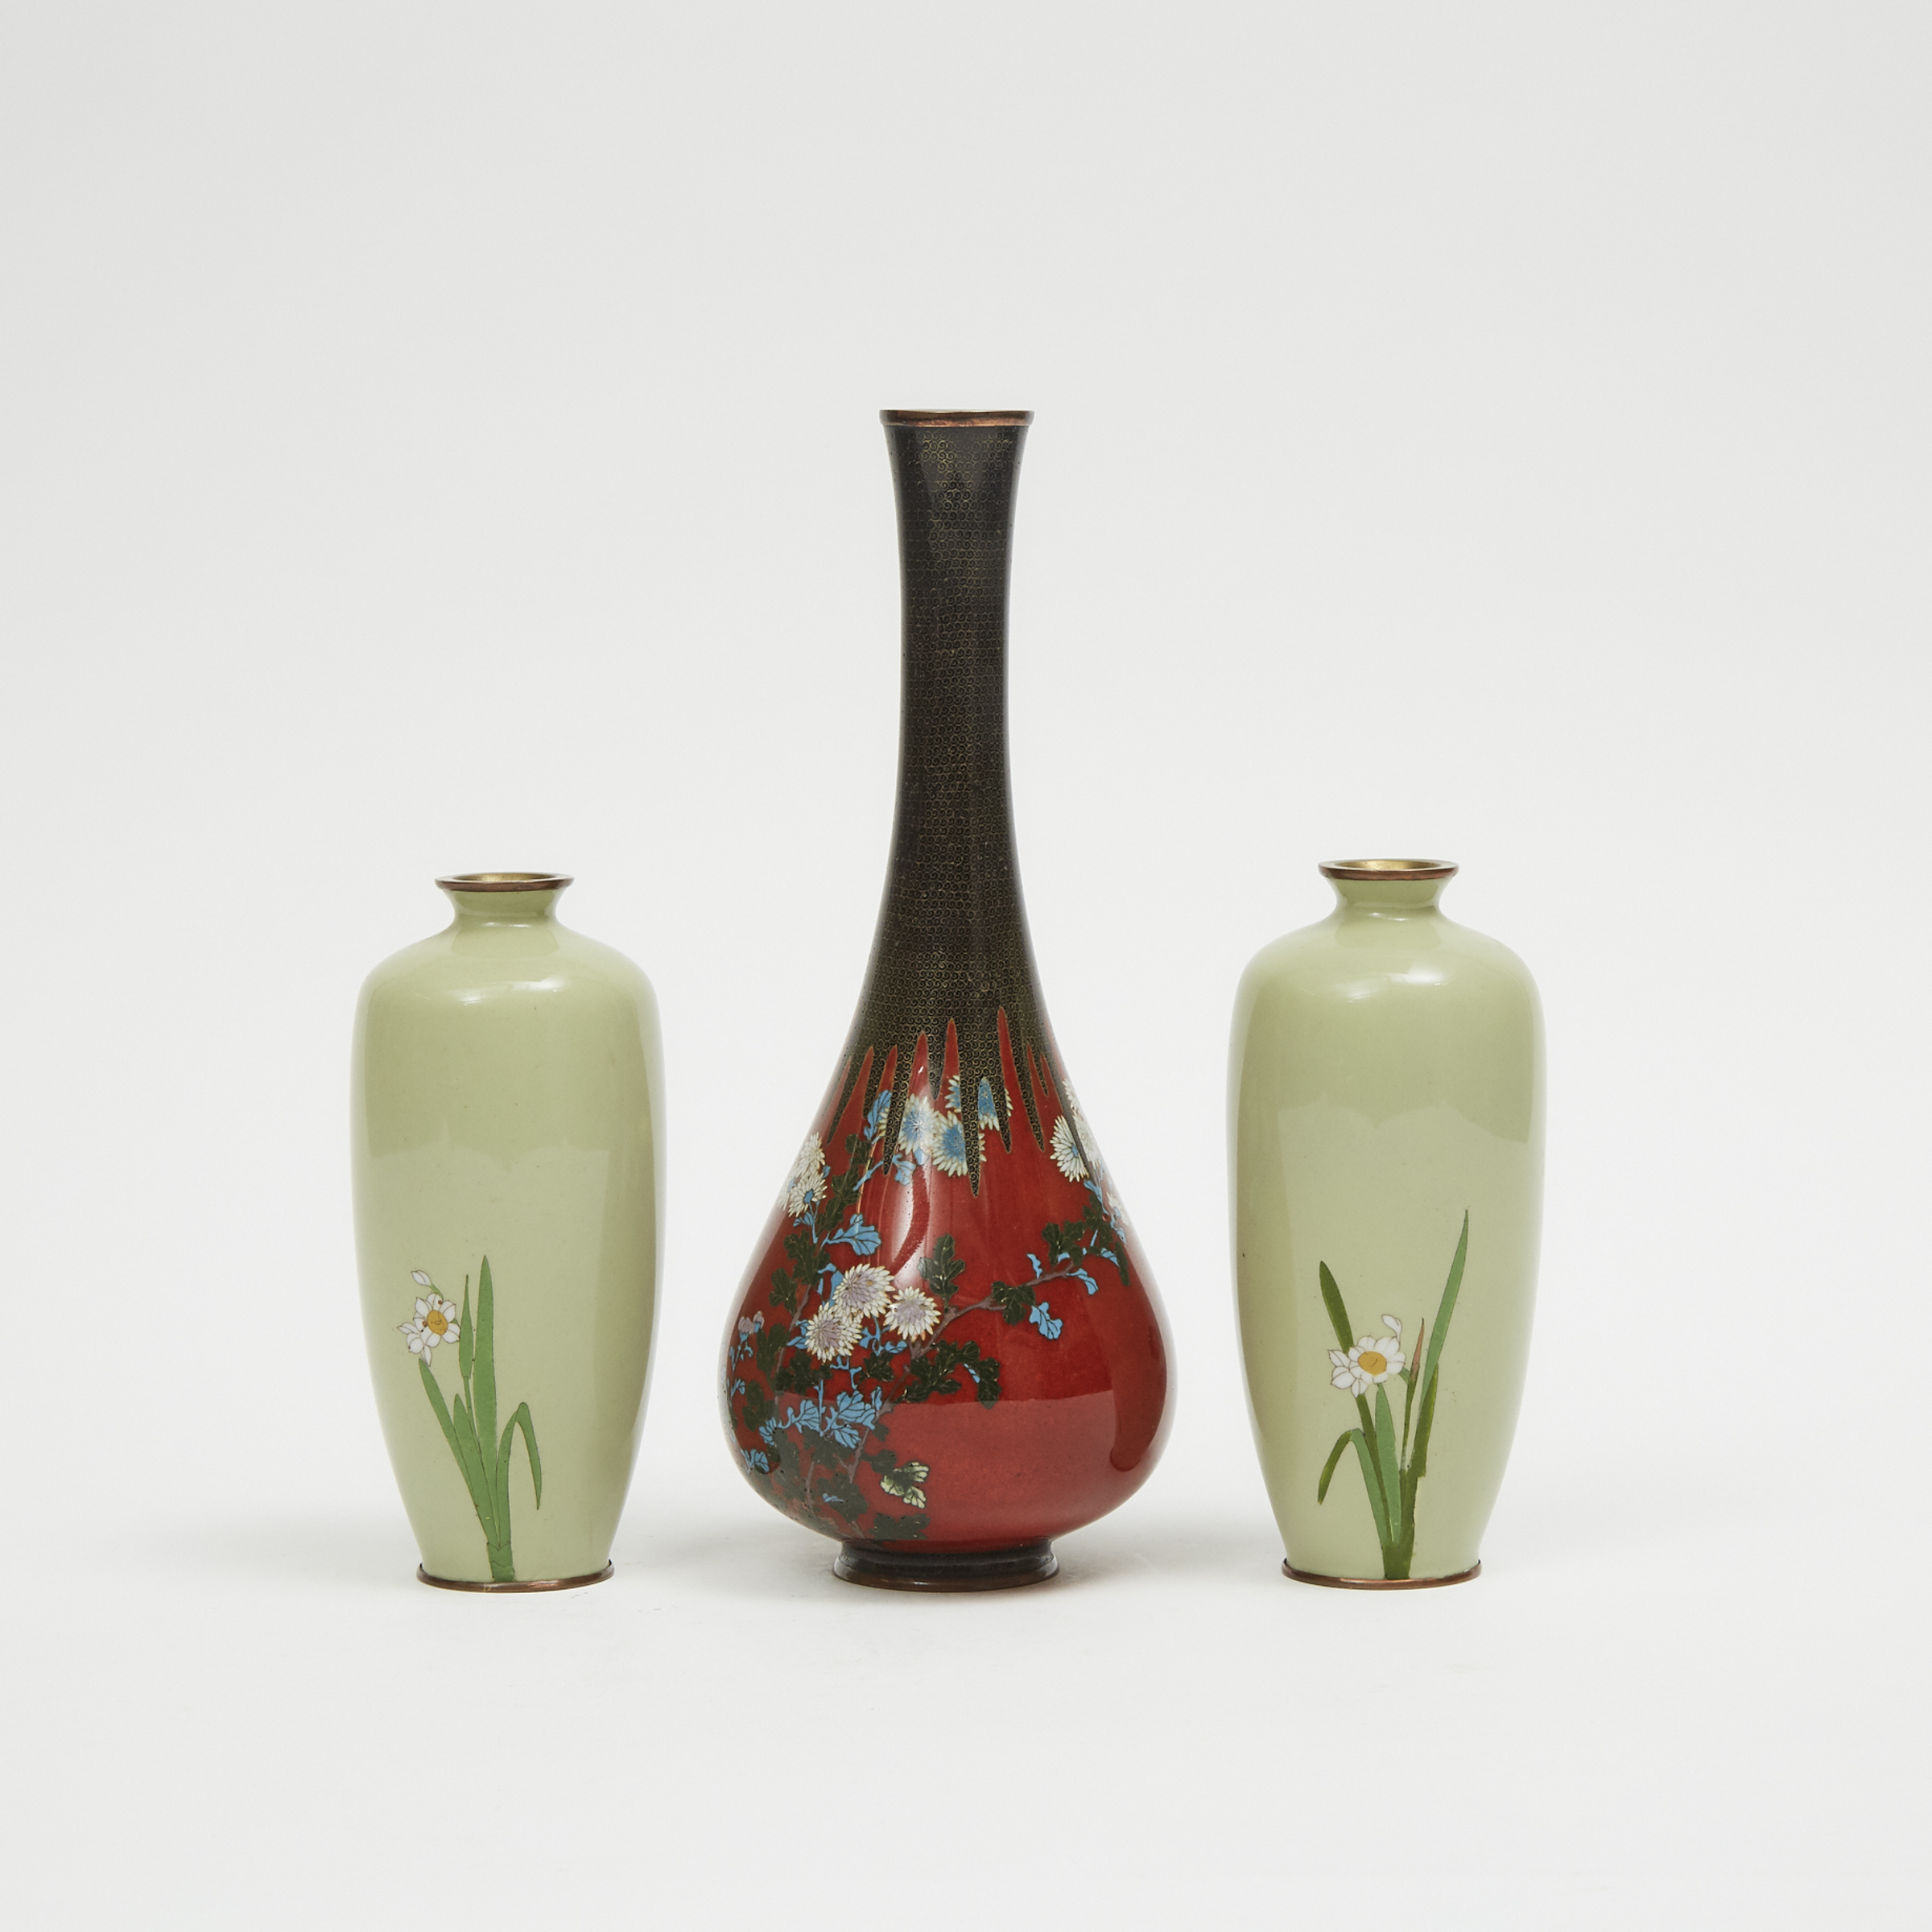 A Group of Three Japanese Cloisonné Vases